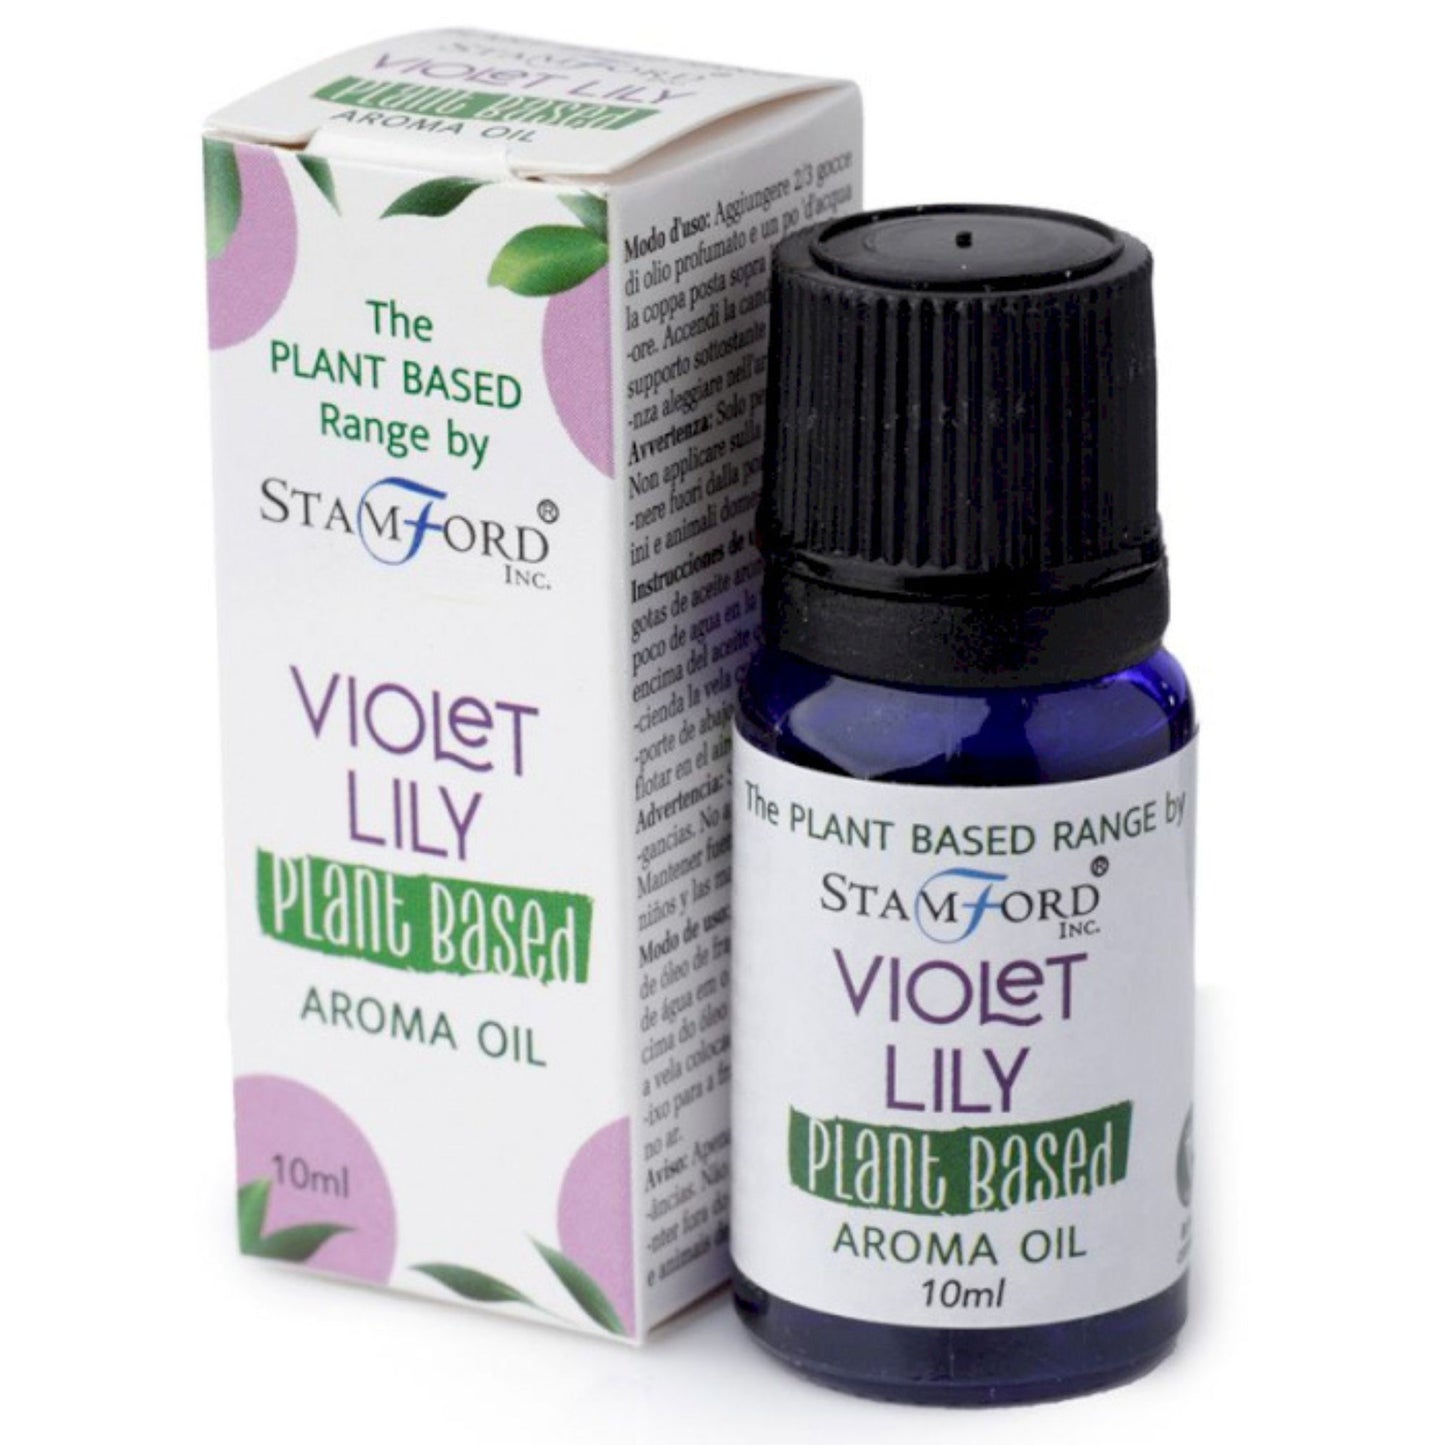 Plant-based Aromatic Oils - Violet Lily